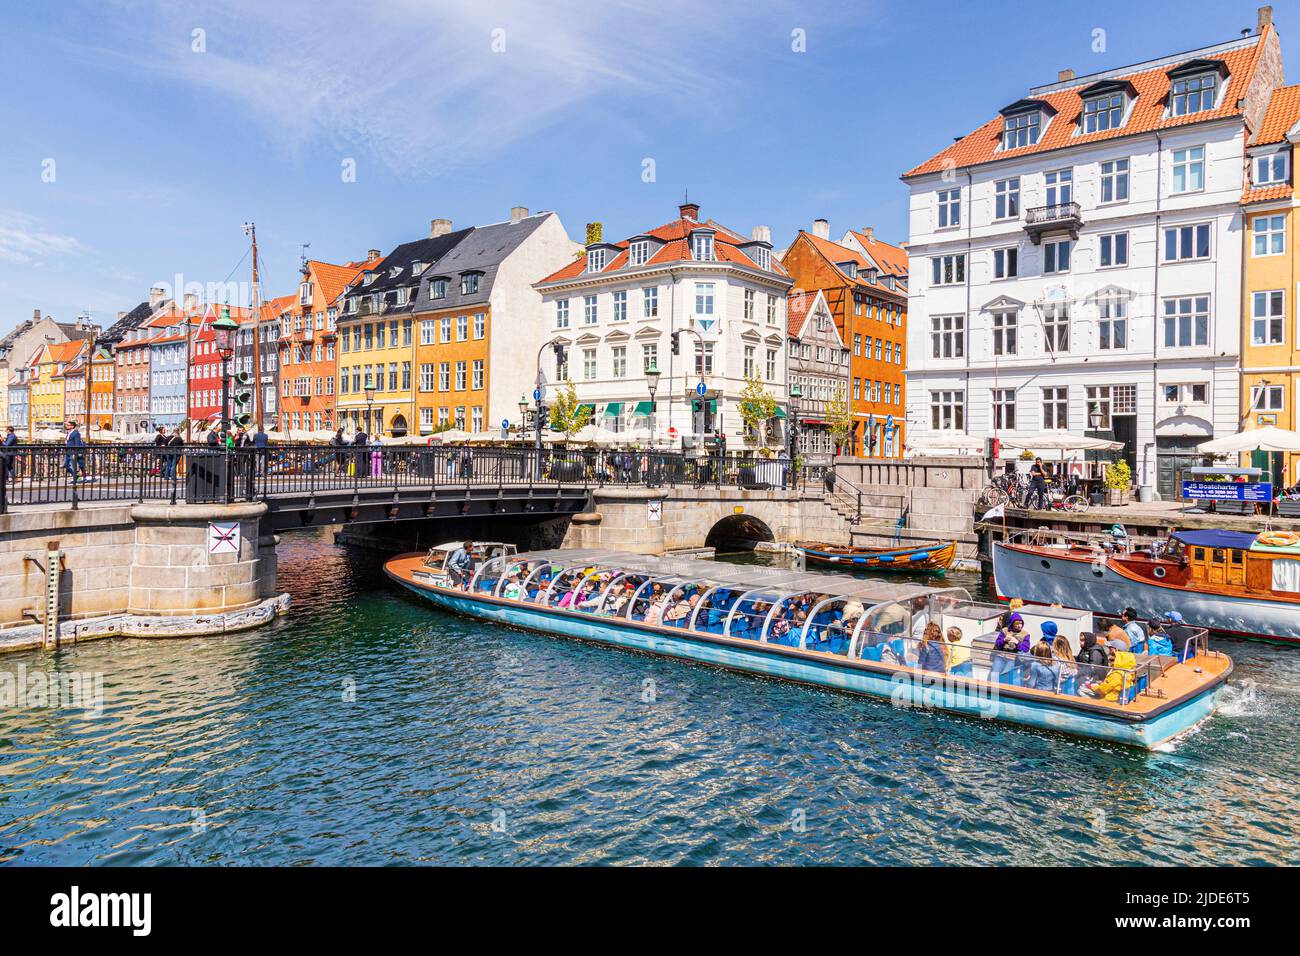 A tourist tour boat passing Nyhavn, the colourful 17th-century canal waterfront in Copenhagen, Denmark. Stock Photo